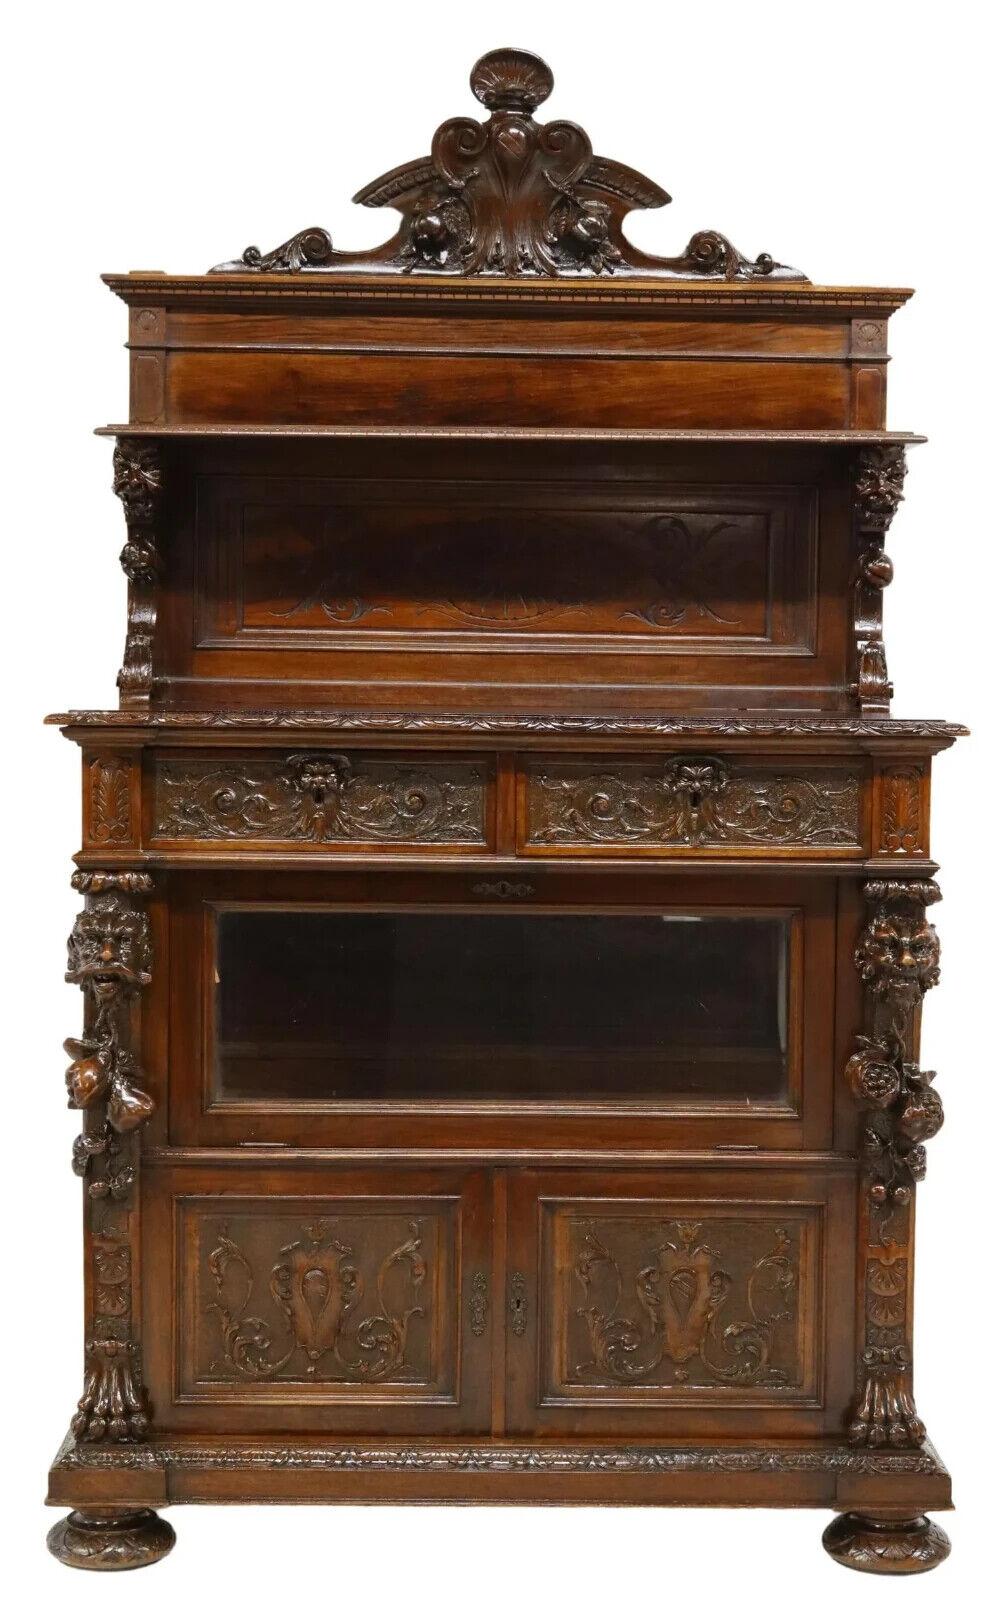 
Stunning Antique Server, Display Case, Italian Renaissance Revival,  Carved, Walnut, 19th Century,  1800s!!

This Italian Renaissance Revival display case is a beautiful antique piece that showcases intricate carvings and craftsmanship. The fully